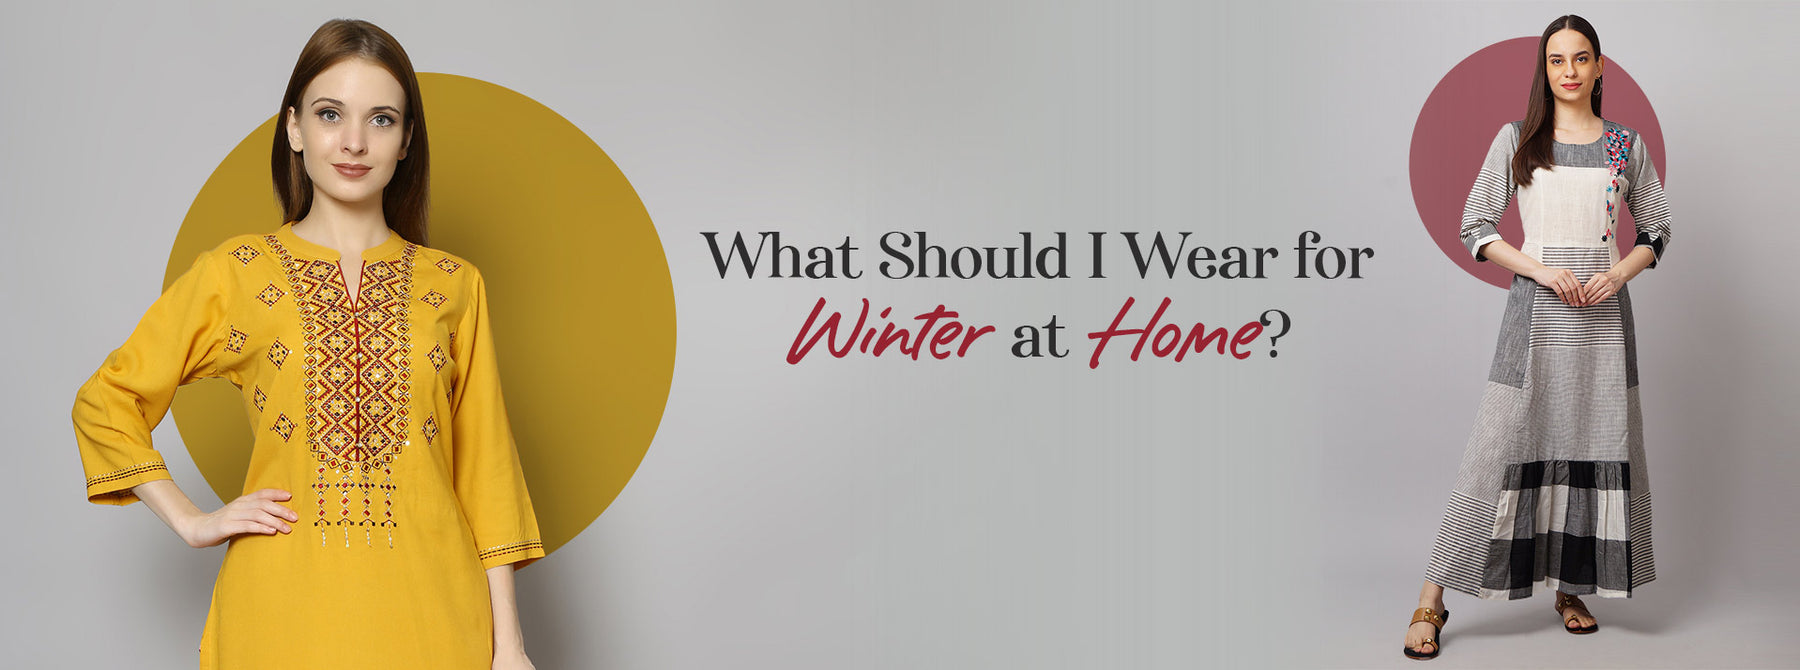 What Should I Wear for Winter at Home?